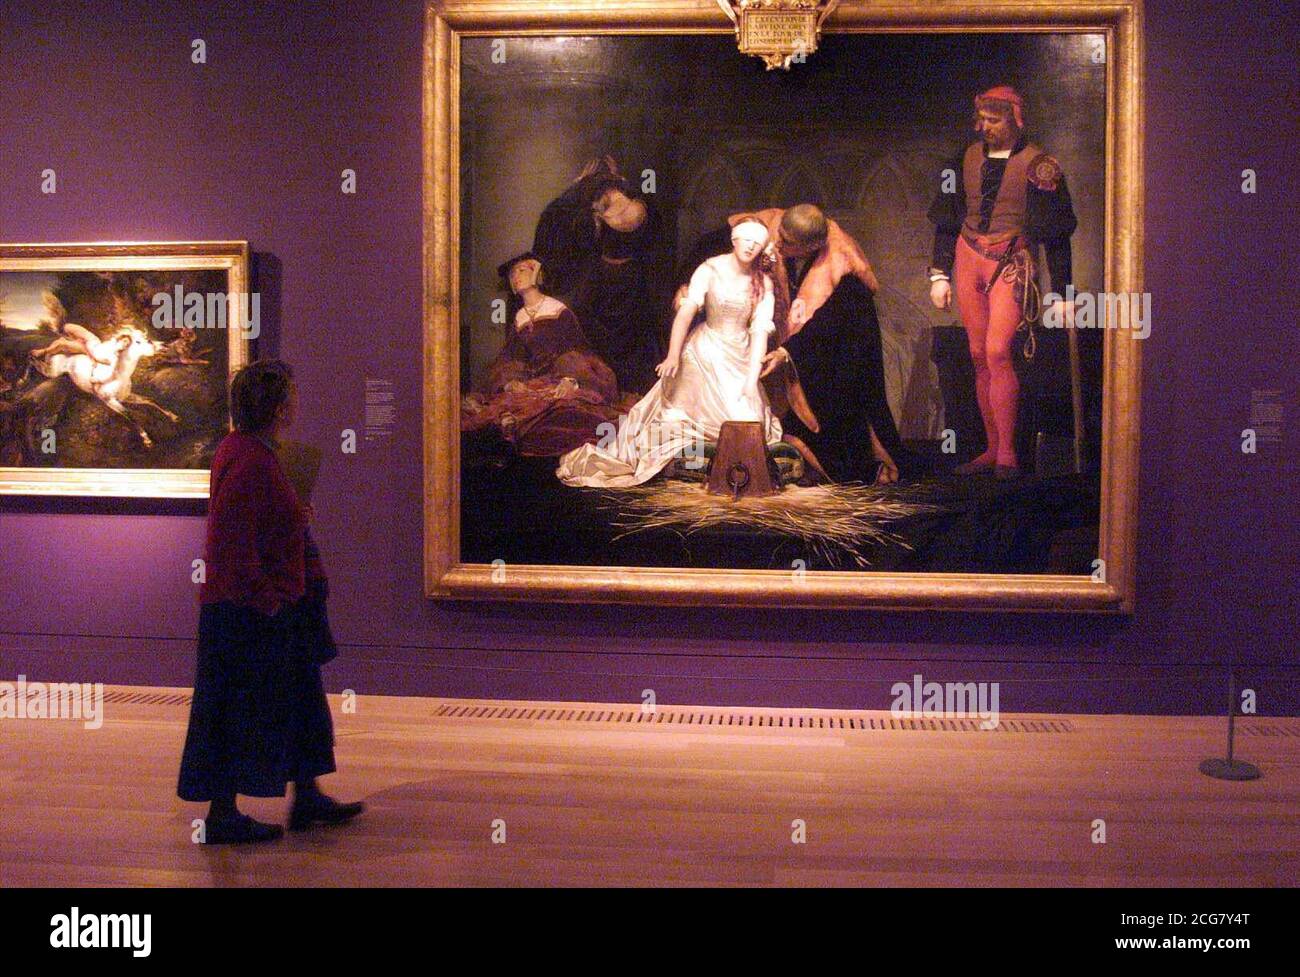 12/02/1554: On this day in History, the young Lady Jane Grey is executed for treason. The Execution of Lady Jane Grey 1833 by Paul Delaroch, on display at the Tate Britain in London, as part of the Constable to Delacroix British art and the French romantics exhibition. * The exhibition includes work from some of the 19th century's greatest painters including Constable and Turner. Stock Photo